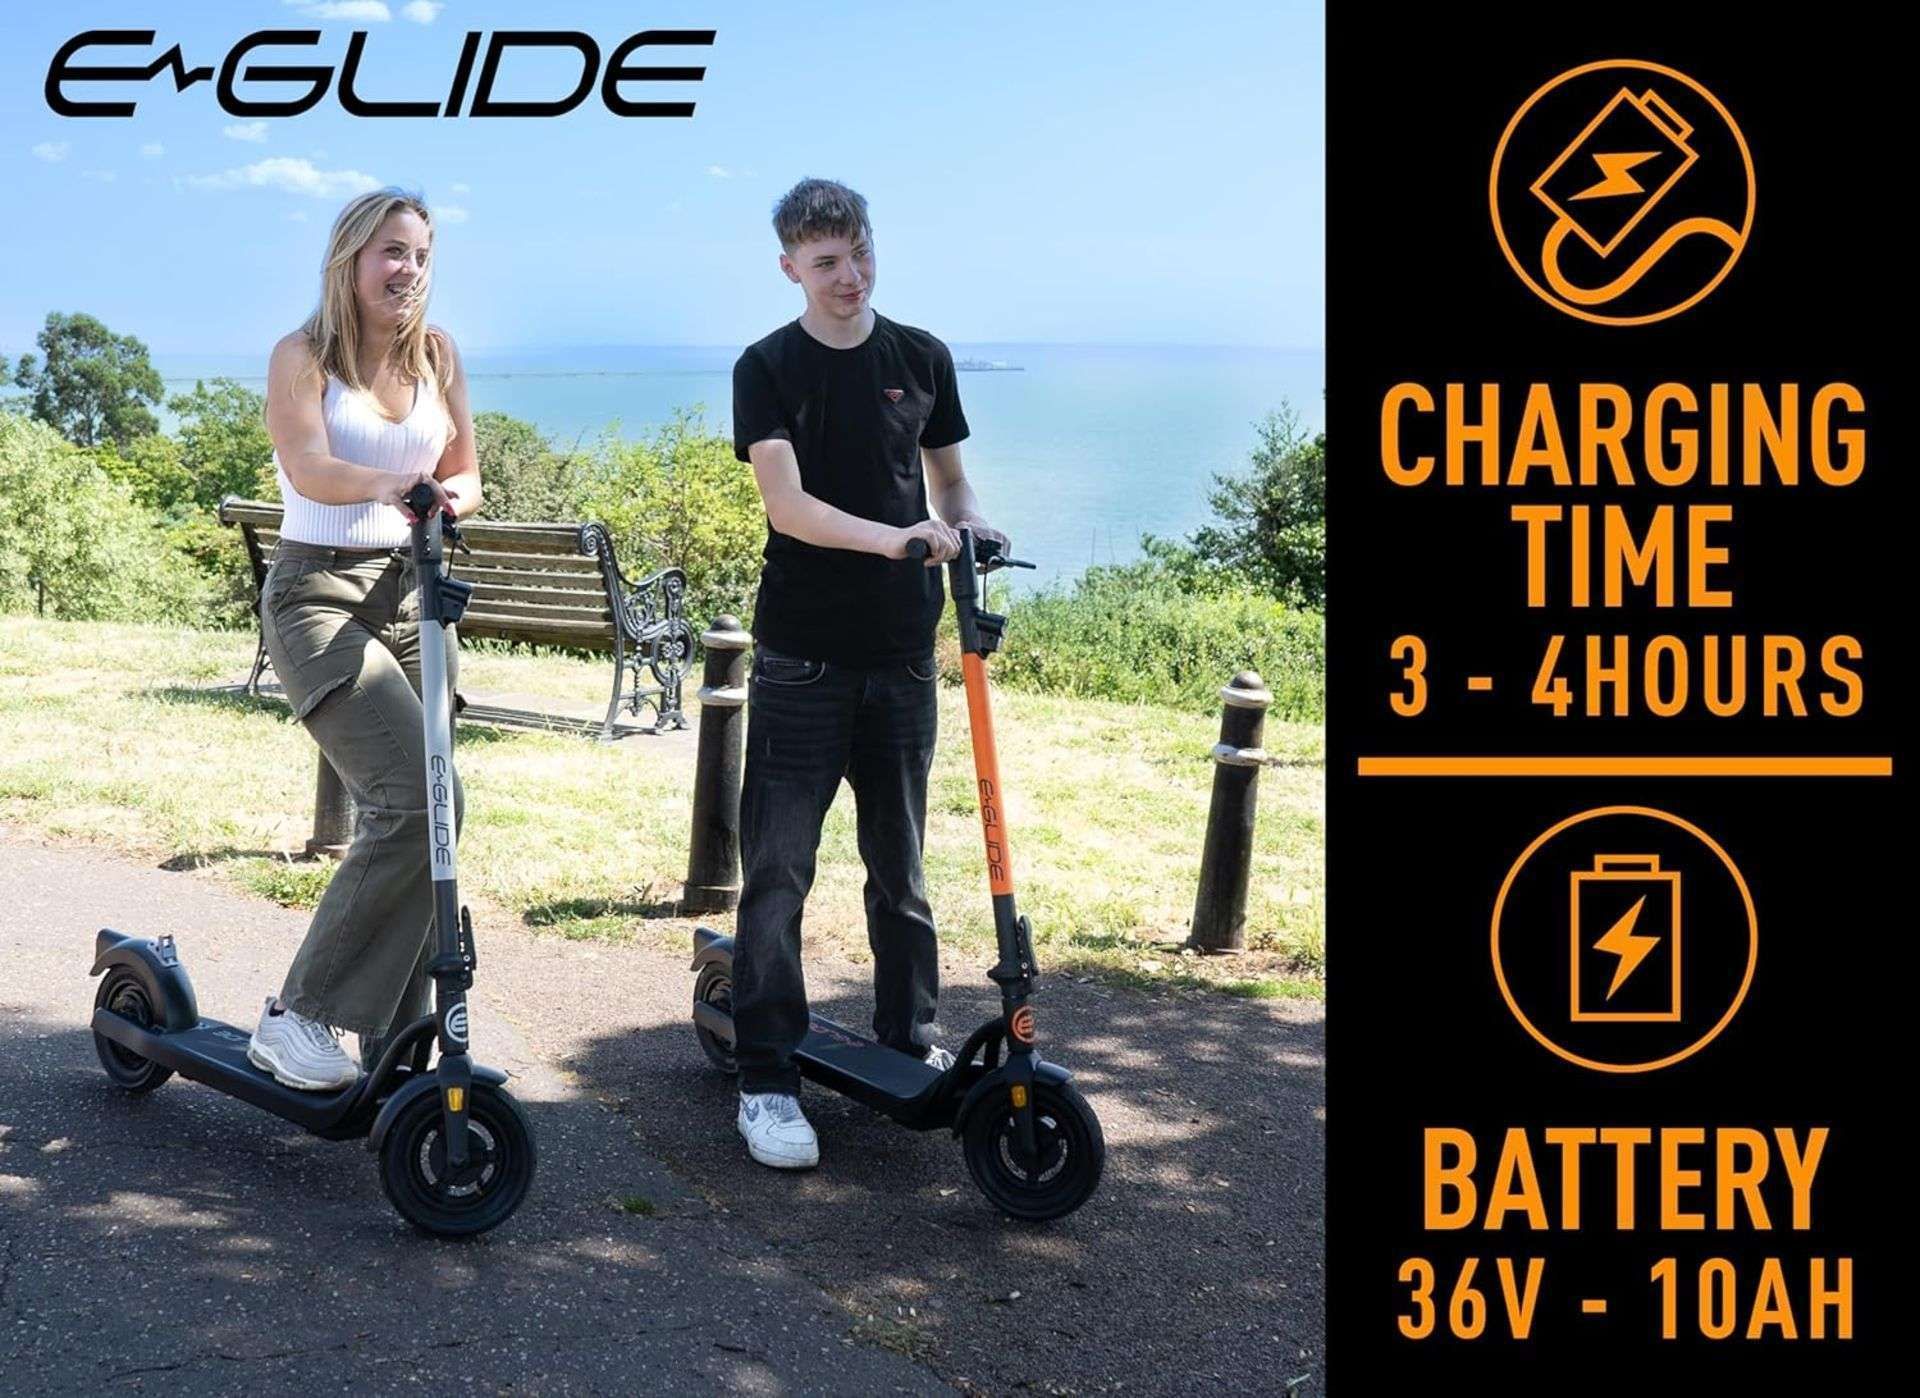 Brand New E-Glide V2 Electric Scooter Grey and Black RRP £599, Introducing a sleek and efficient - Bild 4 aus 4